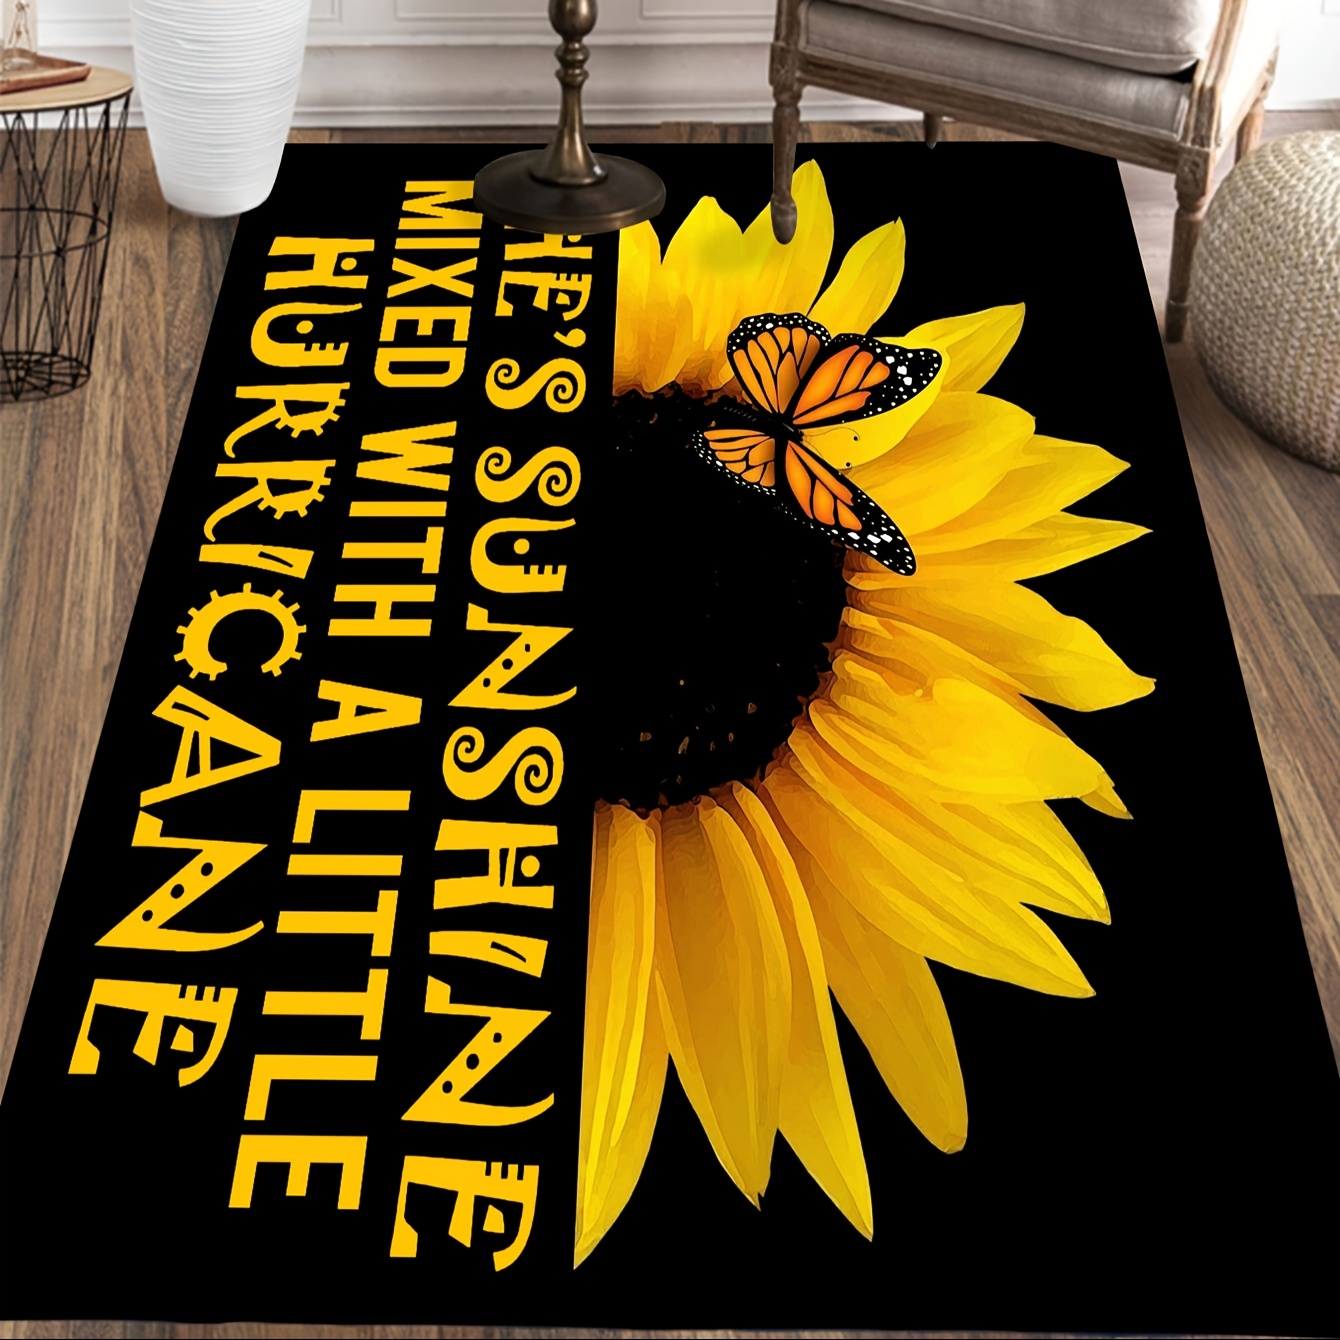 Sunflowers Rug yellow colorful floral rugs 2x3 3x5 4x6 5x7 8x10